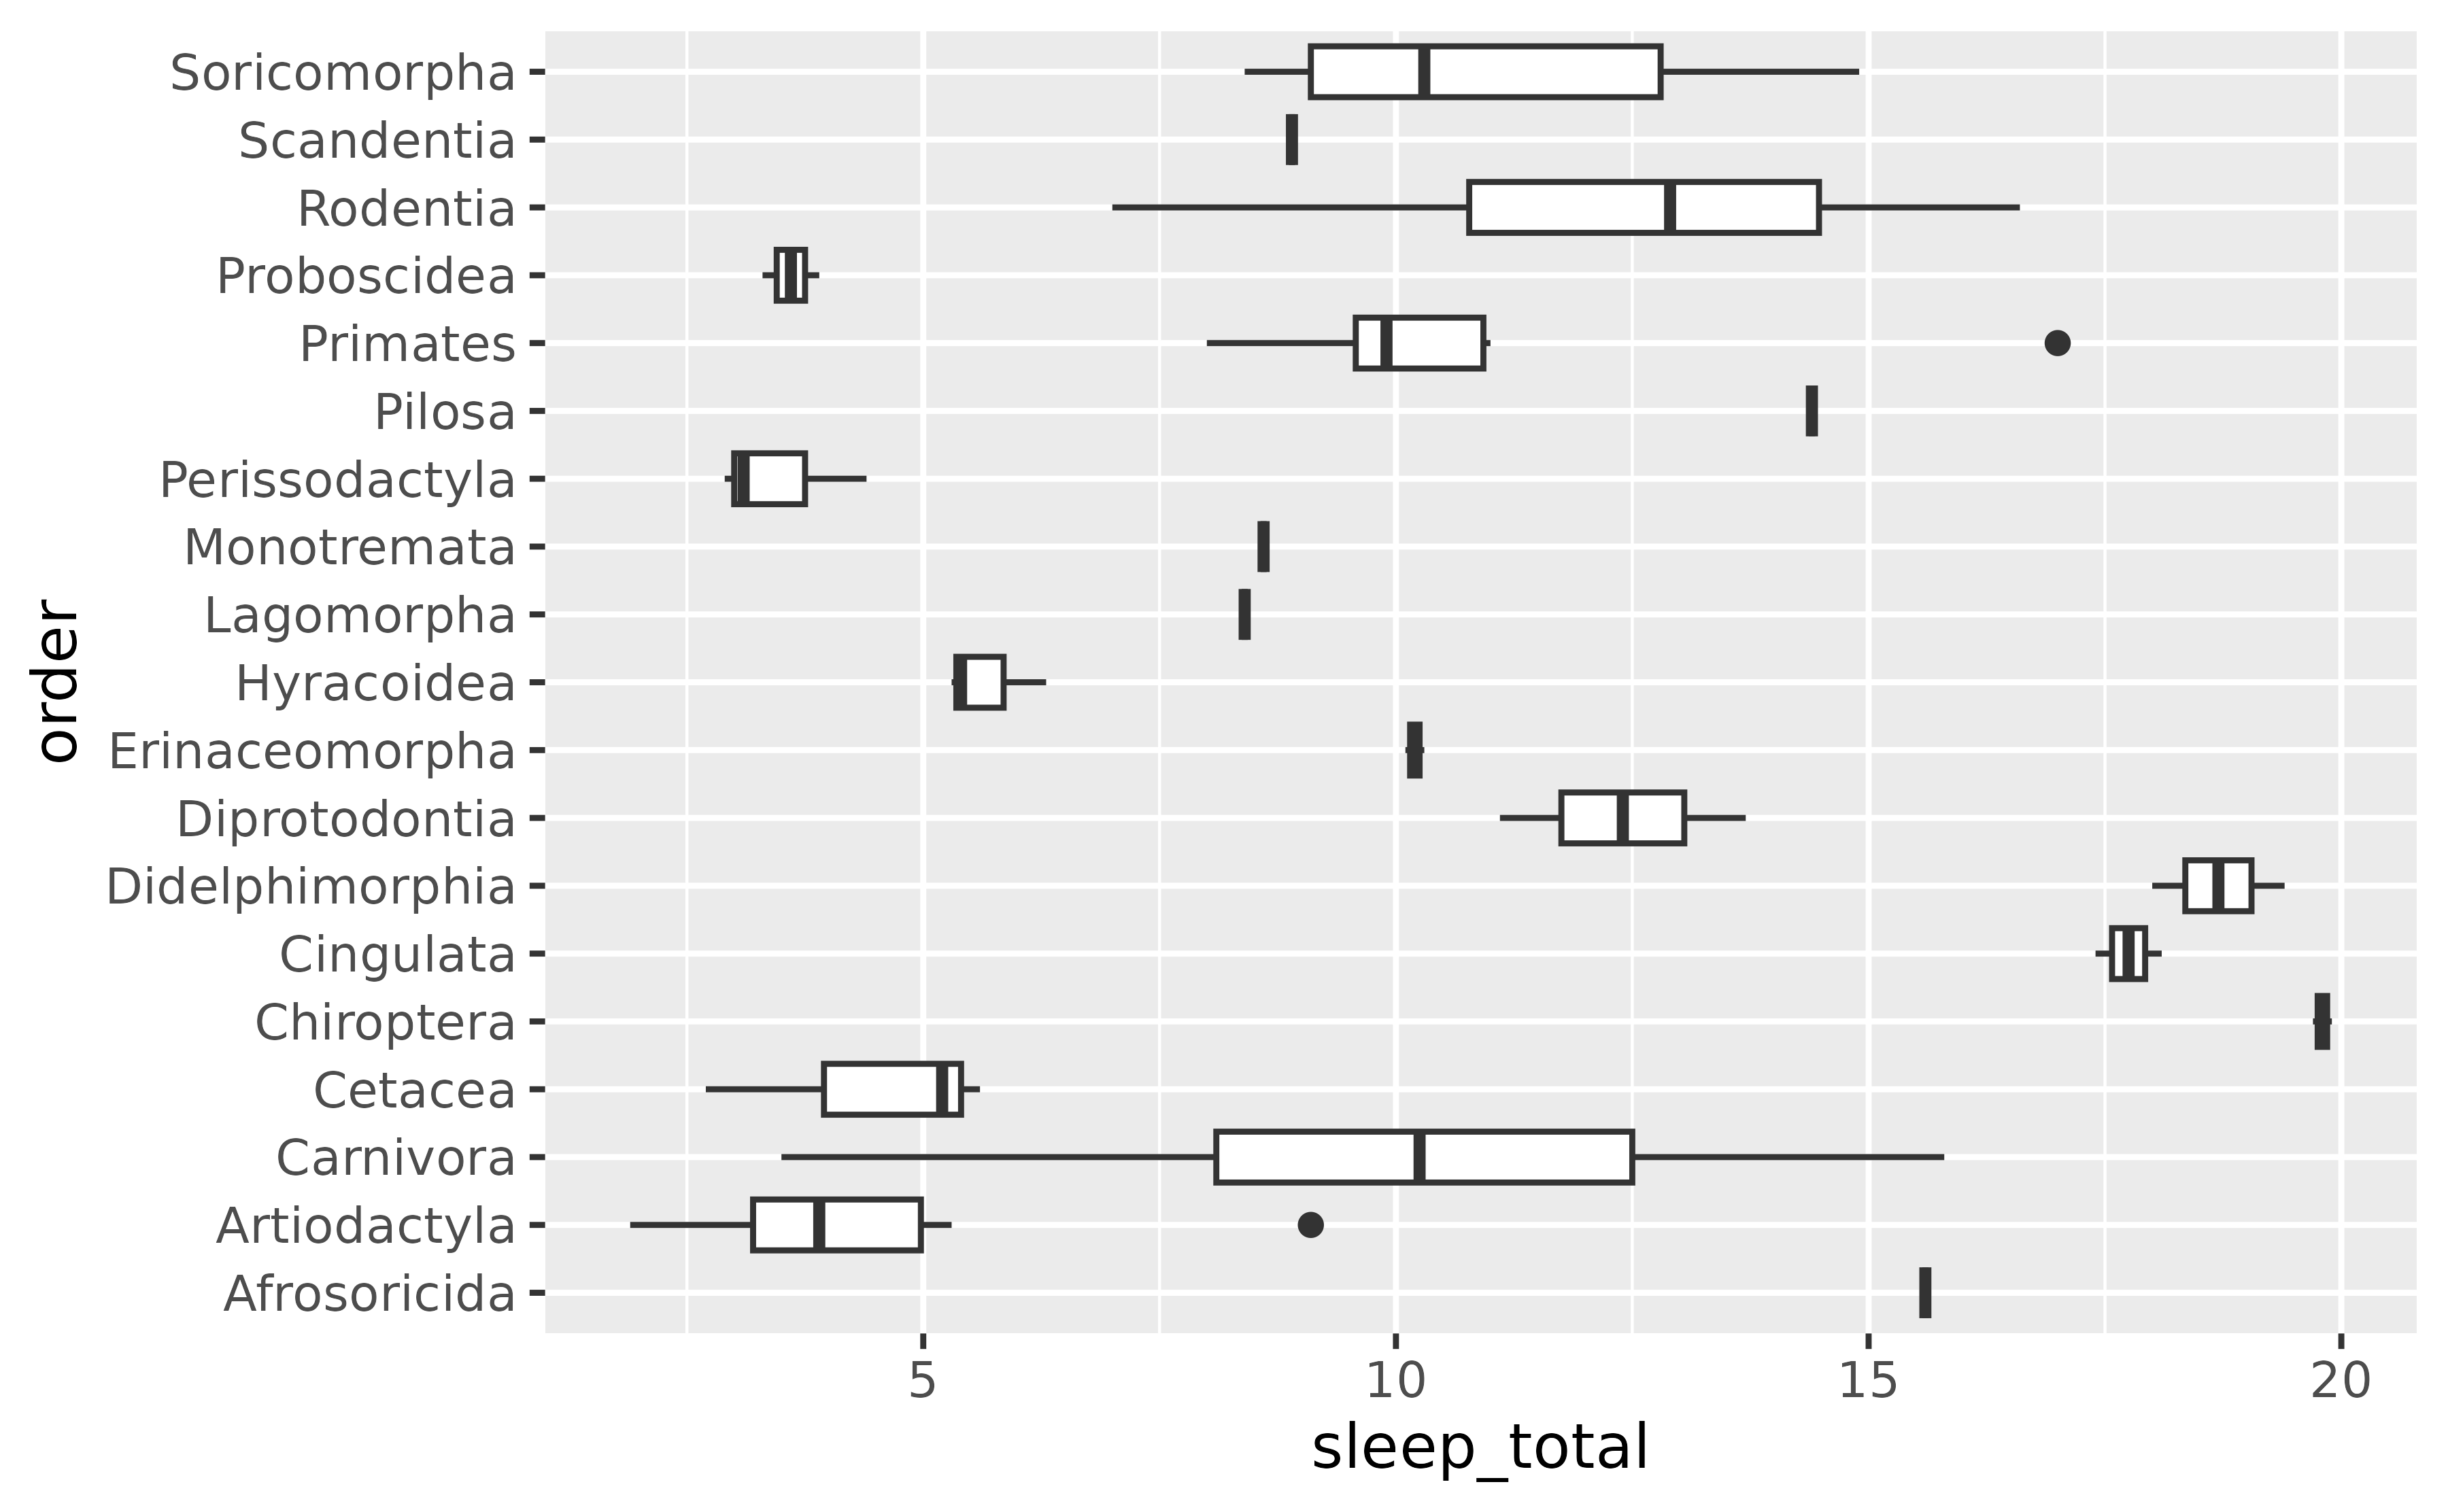 A boxplot showing the total amount of sleep on the x-axis for 19 taxonomical orders of mammals on the y-axis. The y-axis labels are oriented horizontally and are readable.